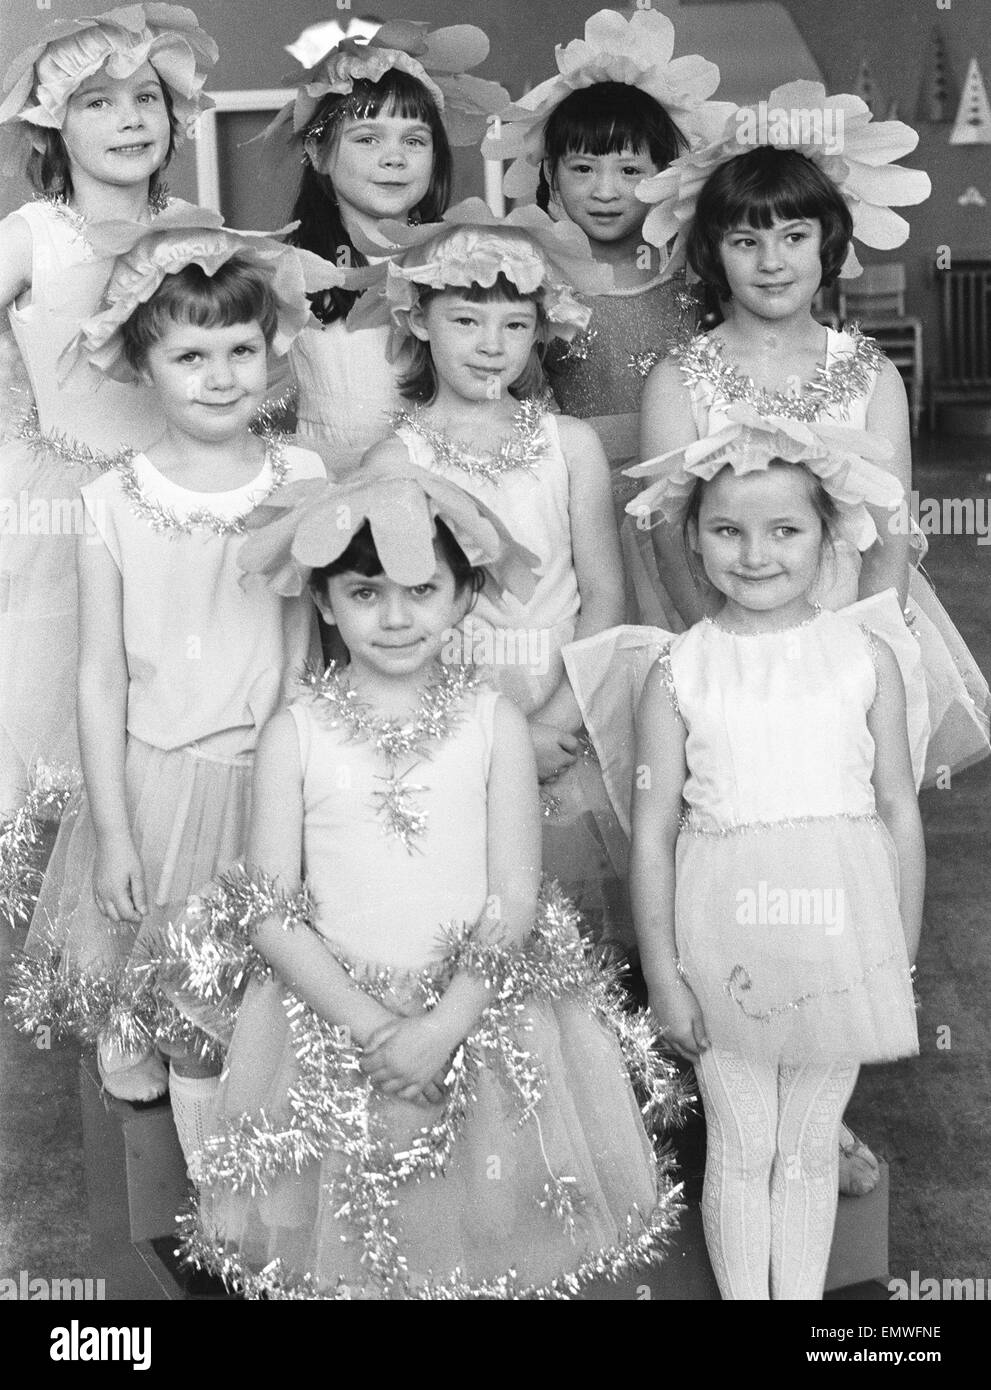 Pantomime children Black and White Stock Photos & Images - Alamy